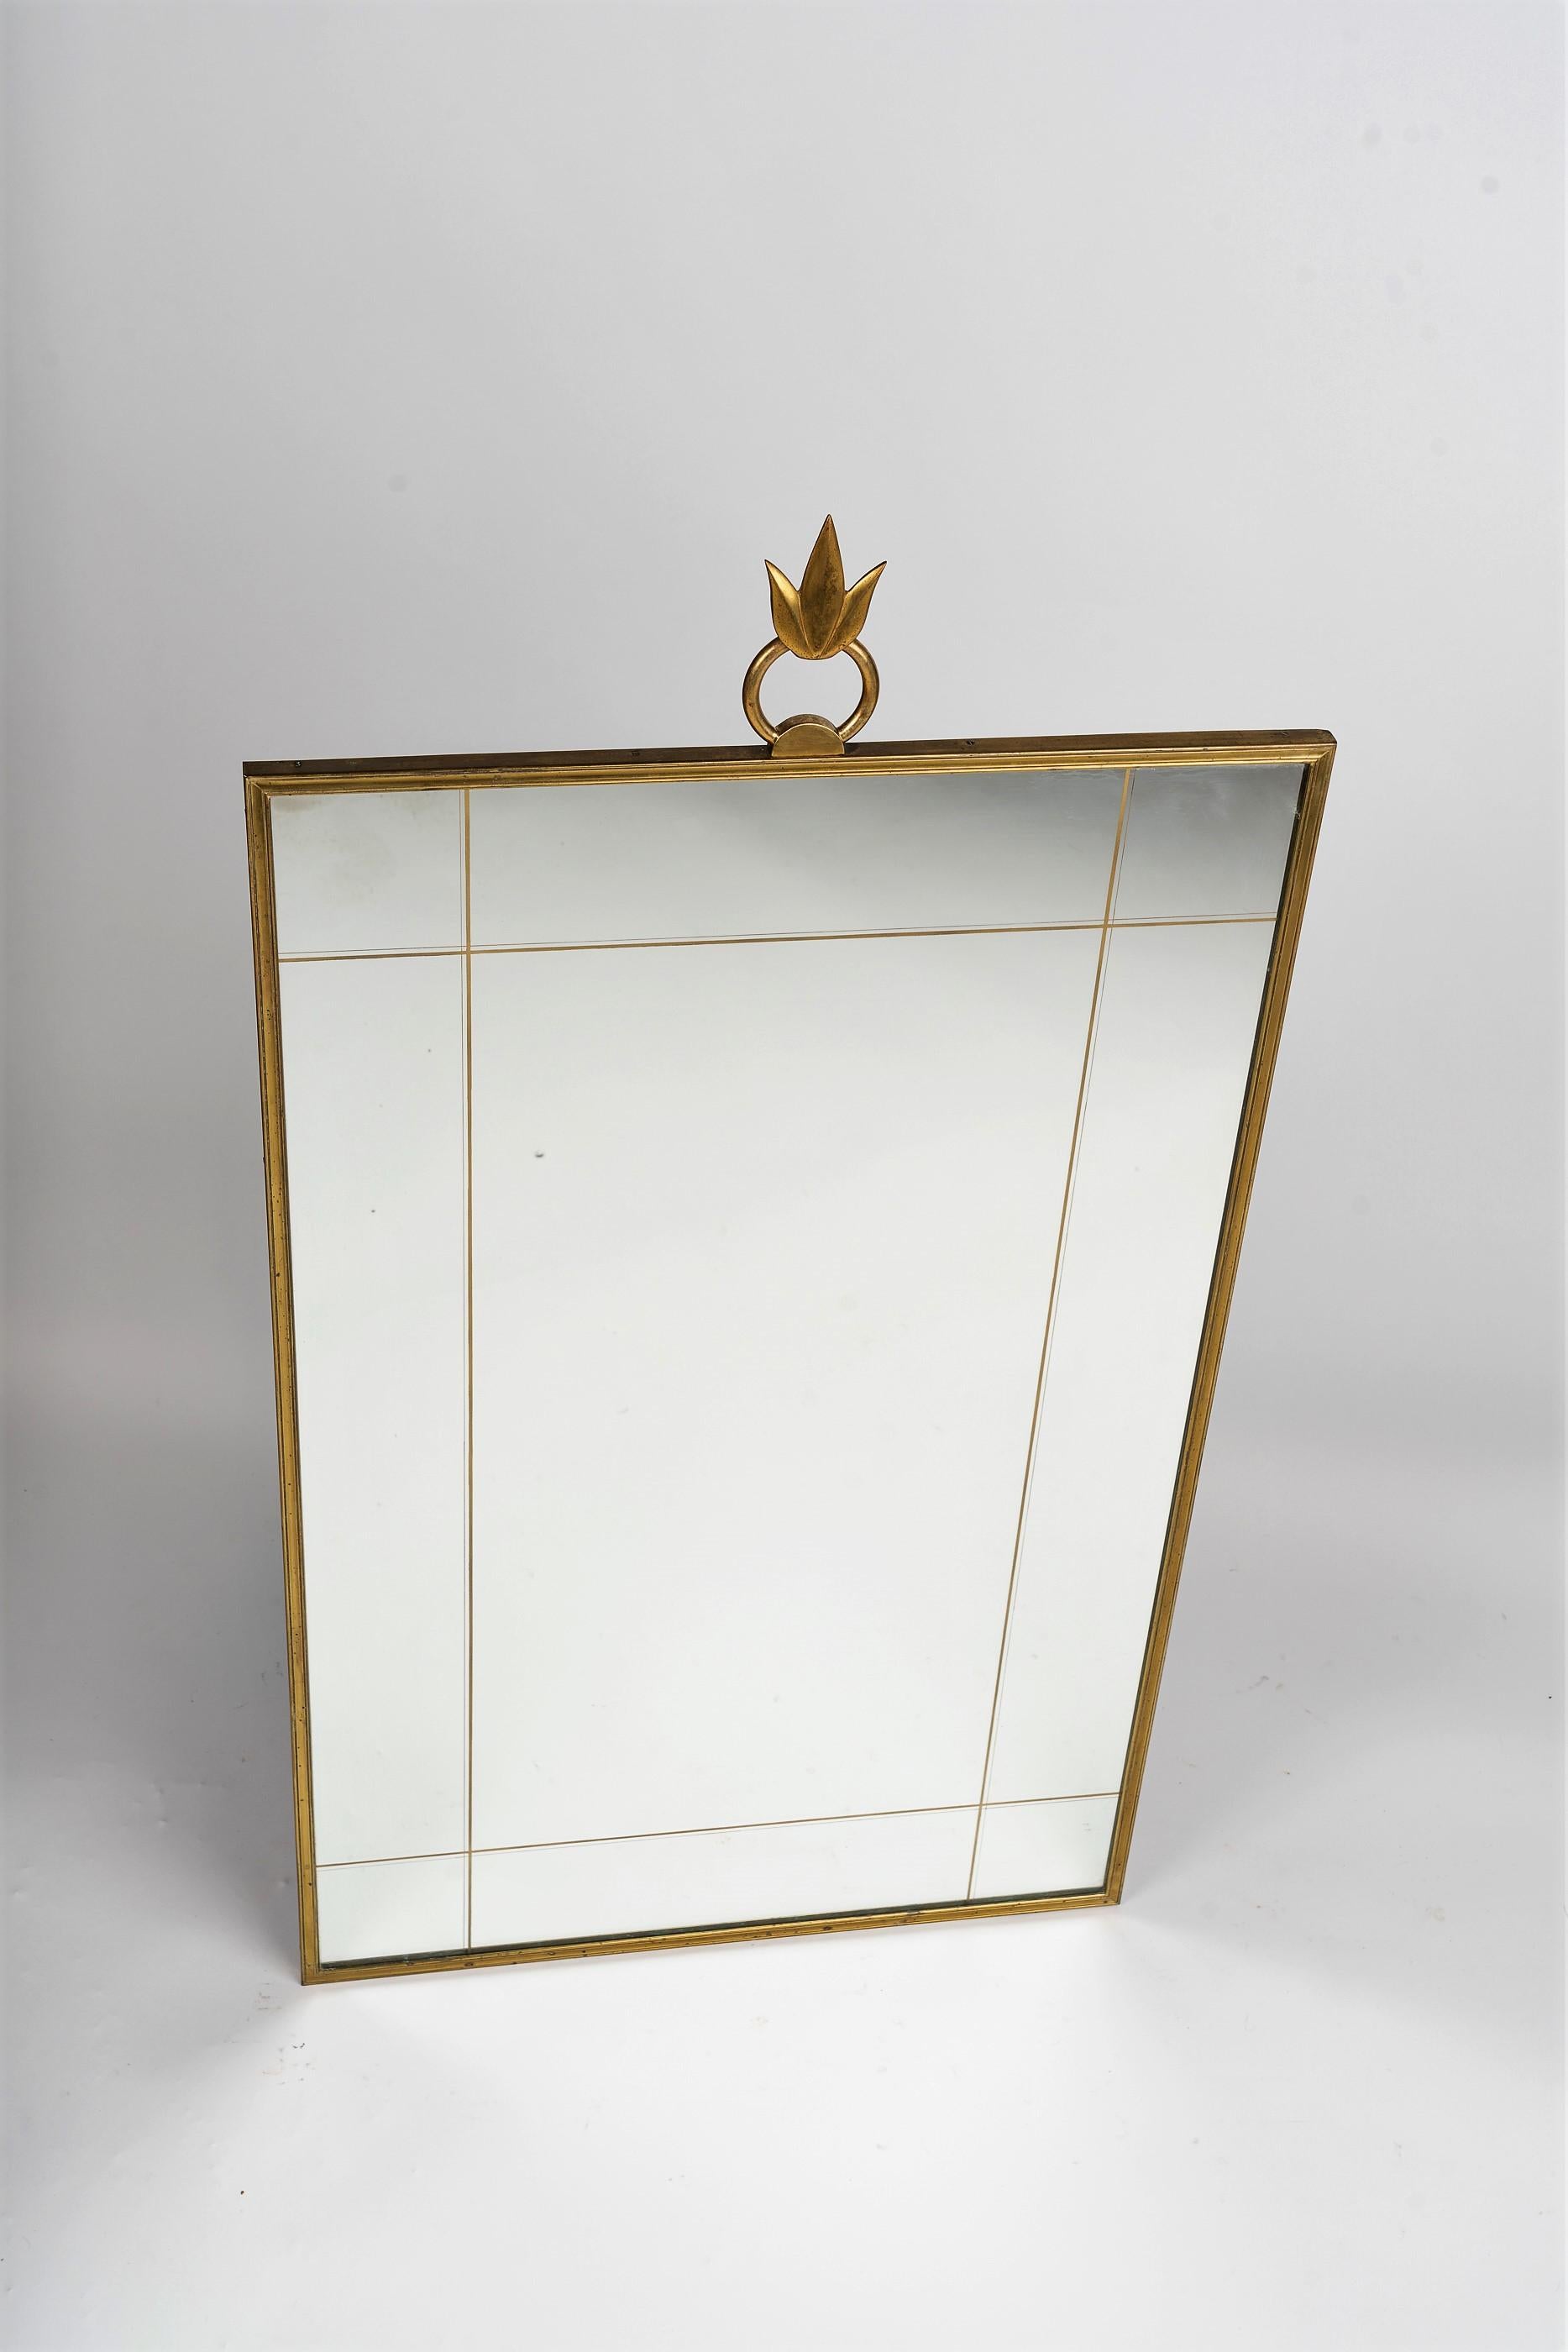 Rare mirror by André Arbus - 1940's Art Deco and minimalism.
Engravings in corner bands and rectangular frame
with patinated brass angles on a curved flat ornamented, at the top, with a
fixed ring pediment, 